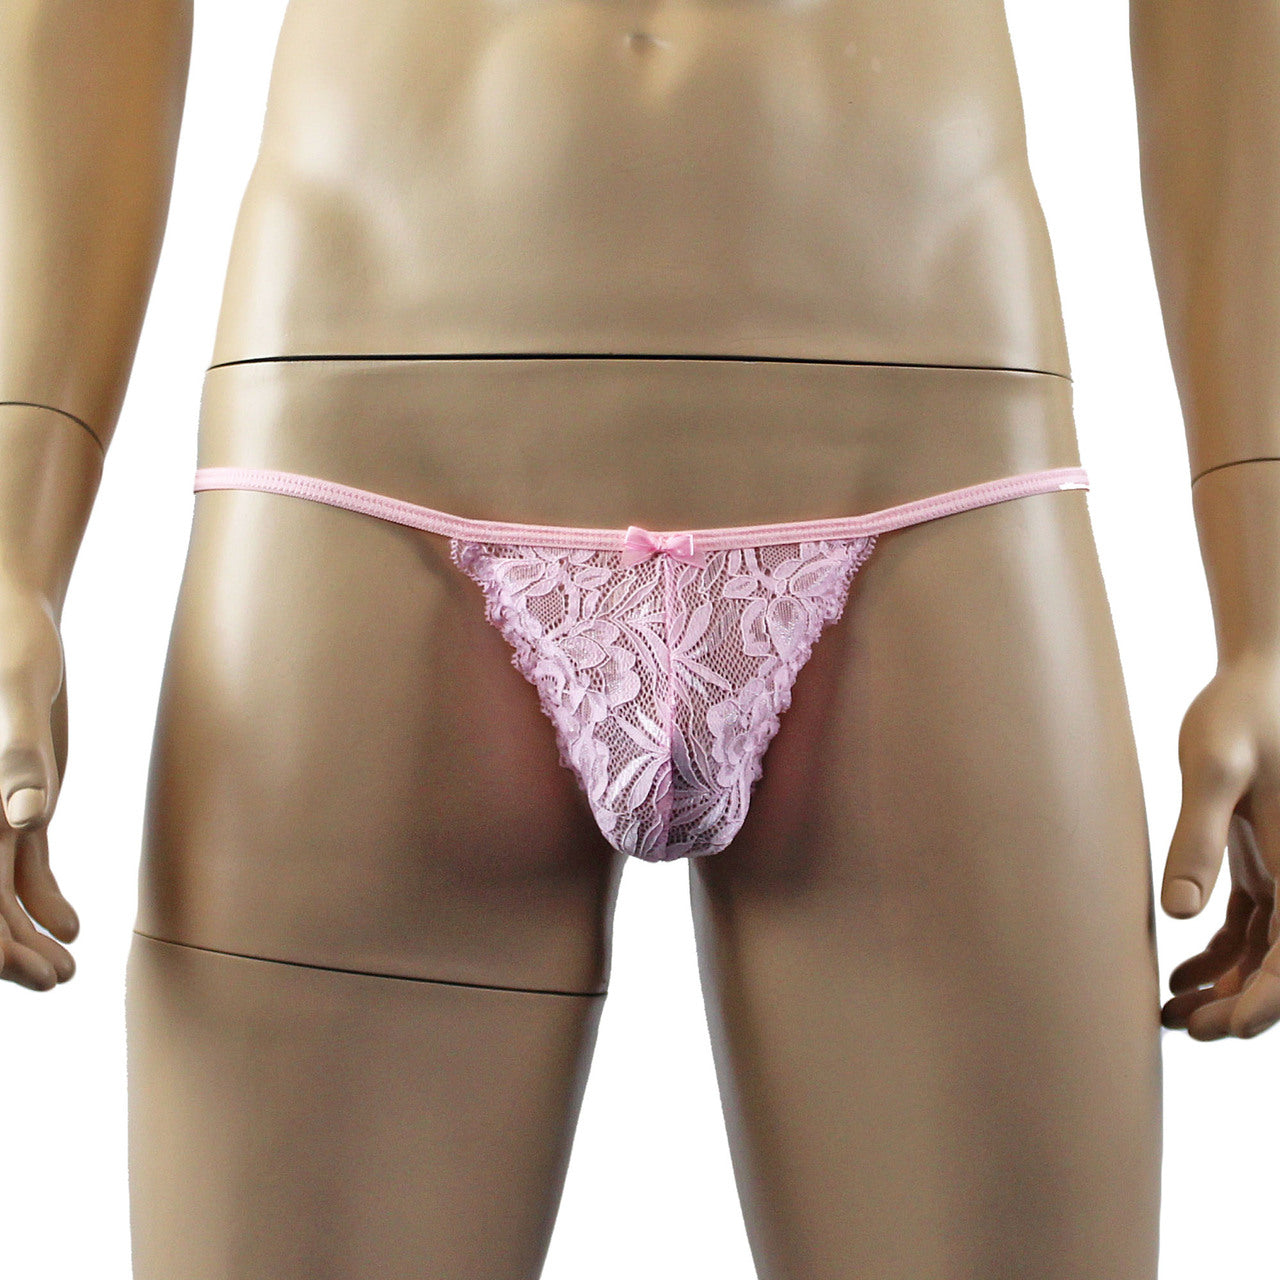 Mens Sexy Lace Pouch G string Panty Male Lingerie (light pink plus other colours)